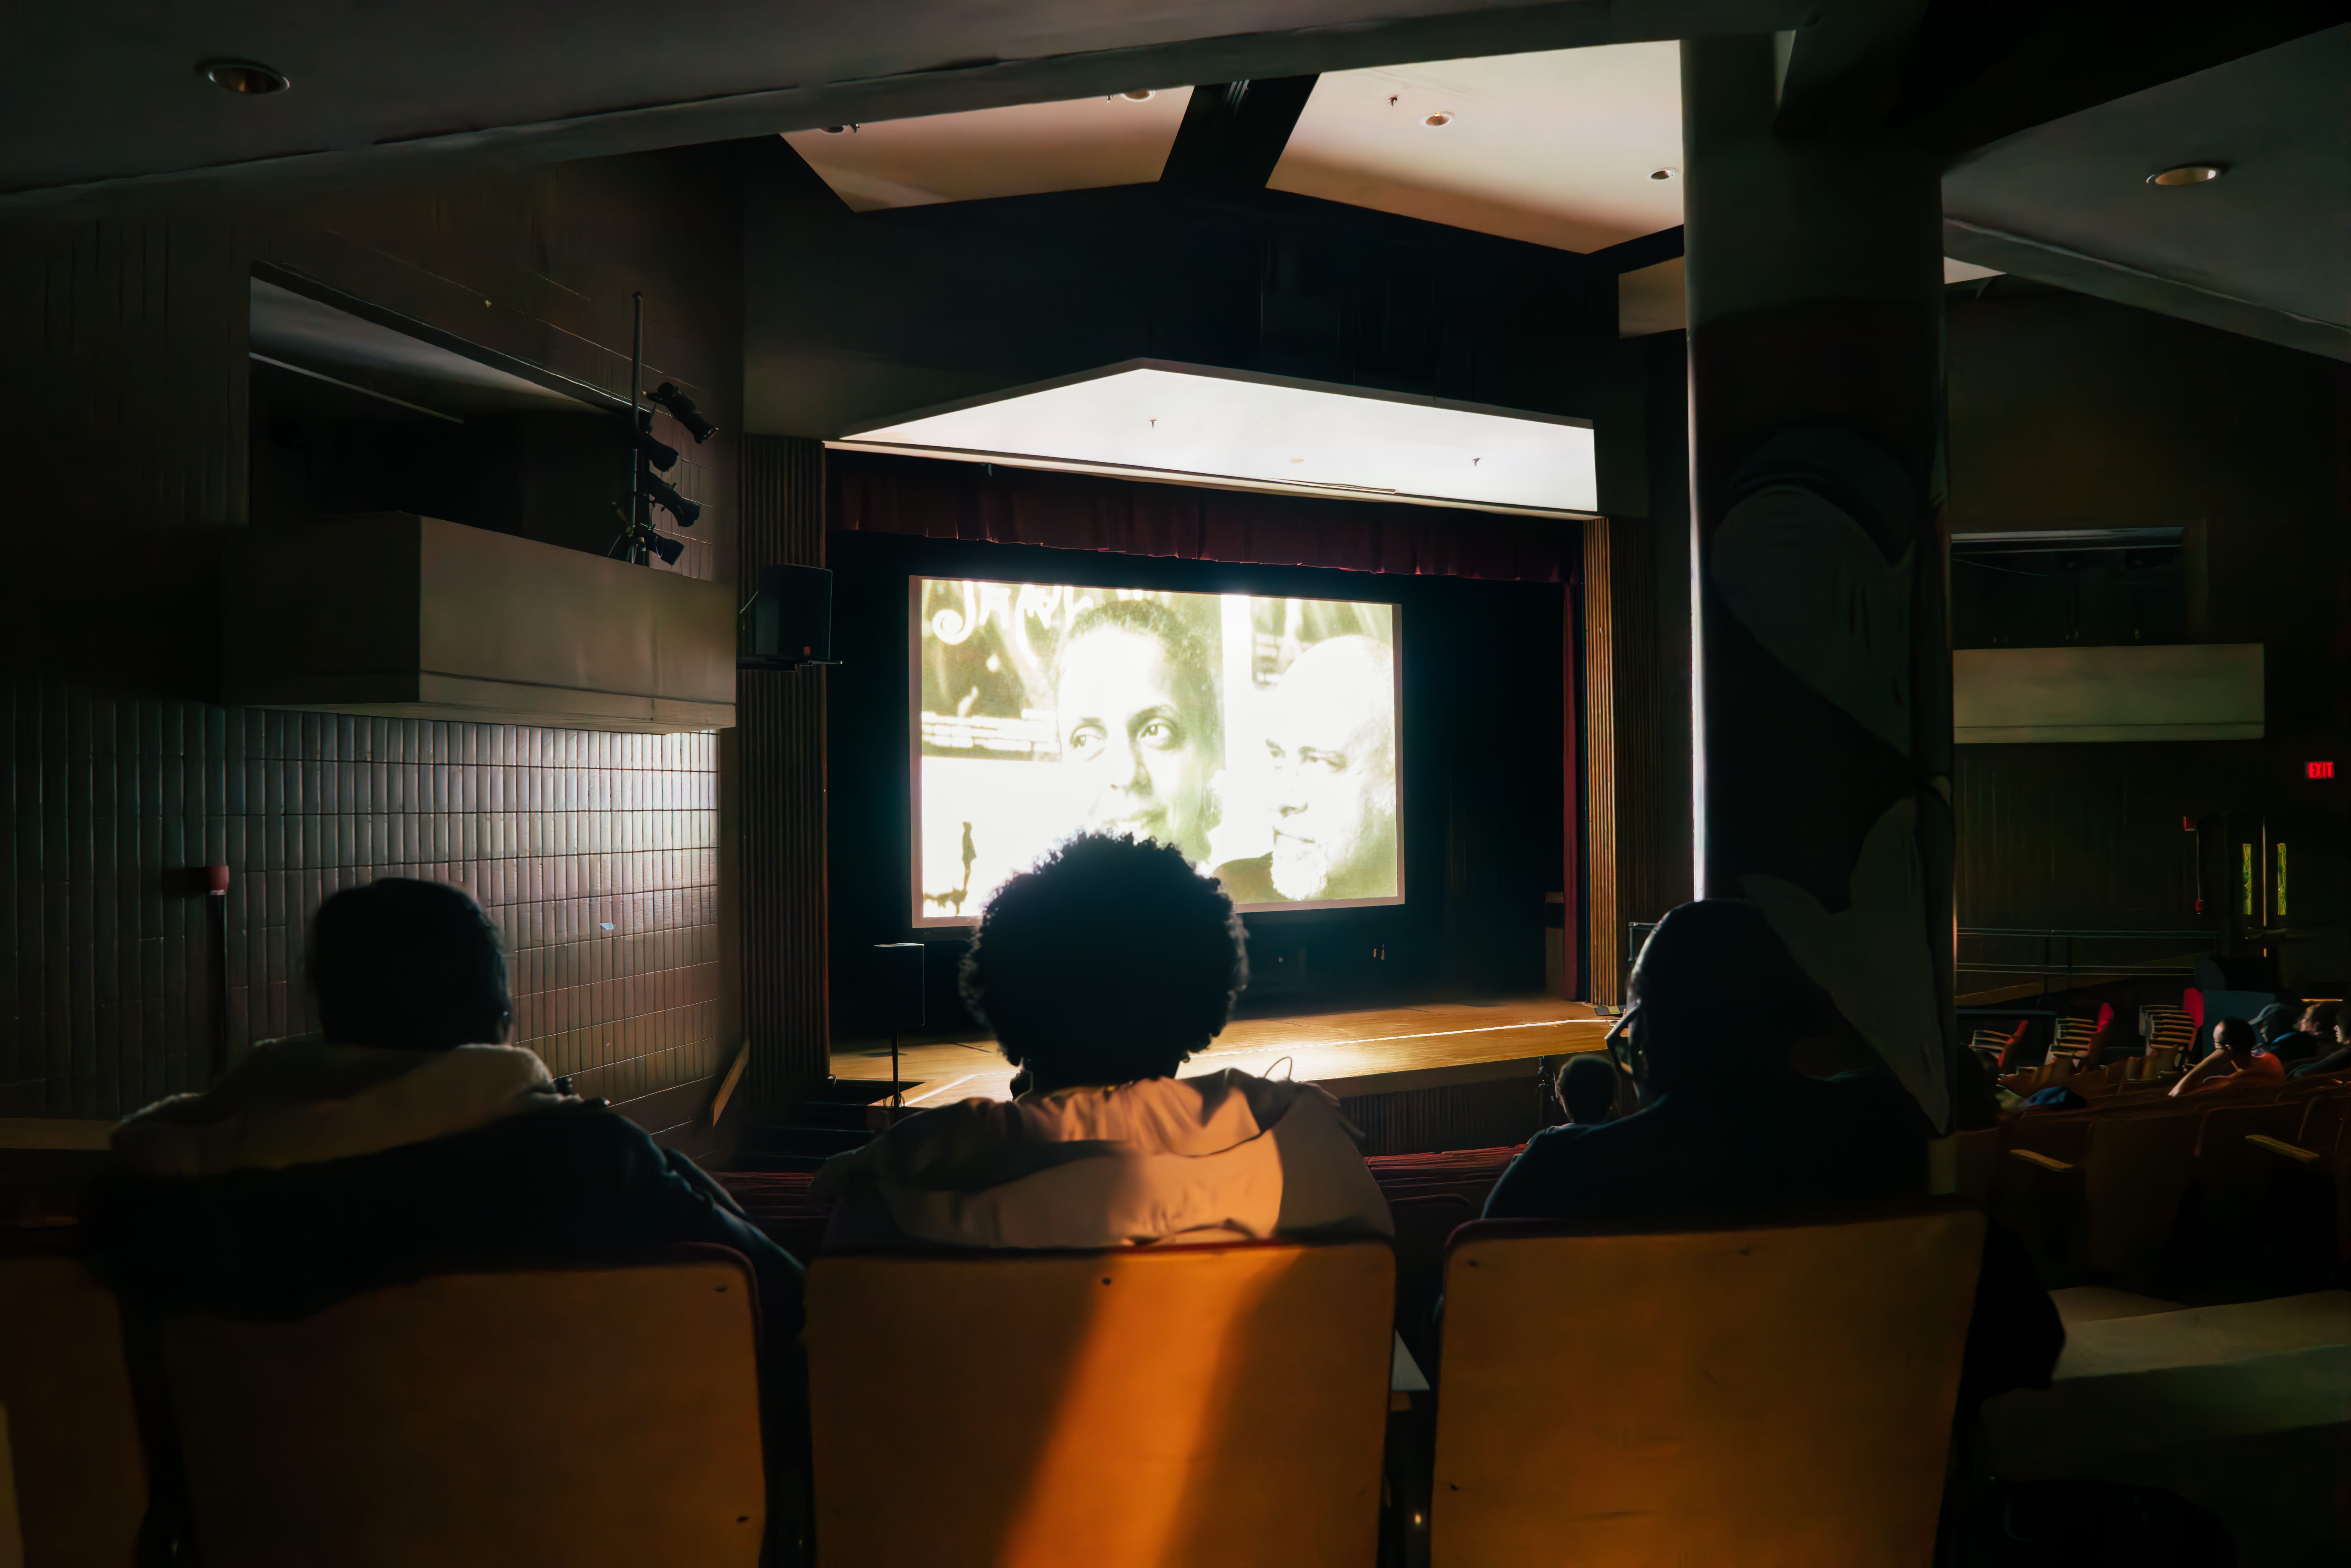 Silhouettes of a students sitting in an auditorium watching a movie on a large screen.